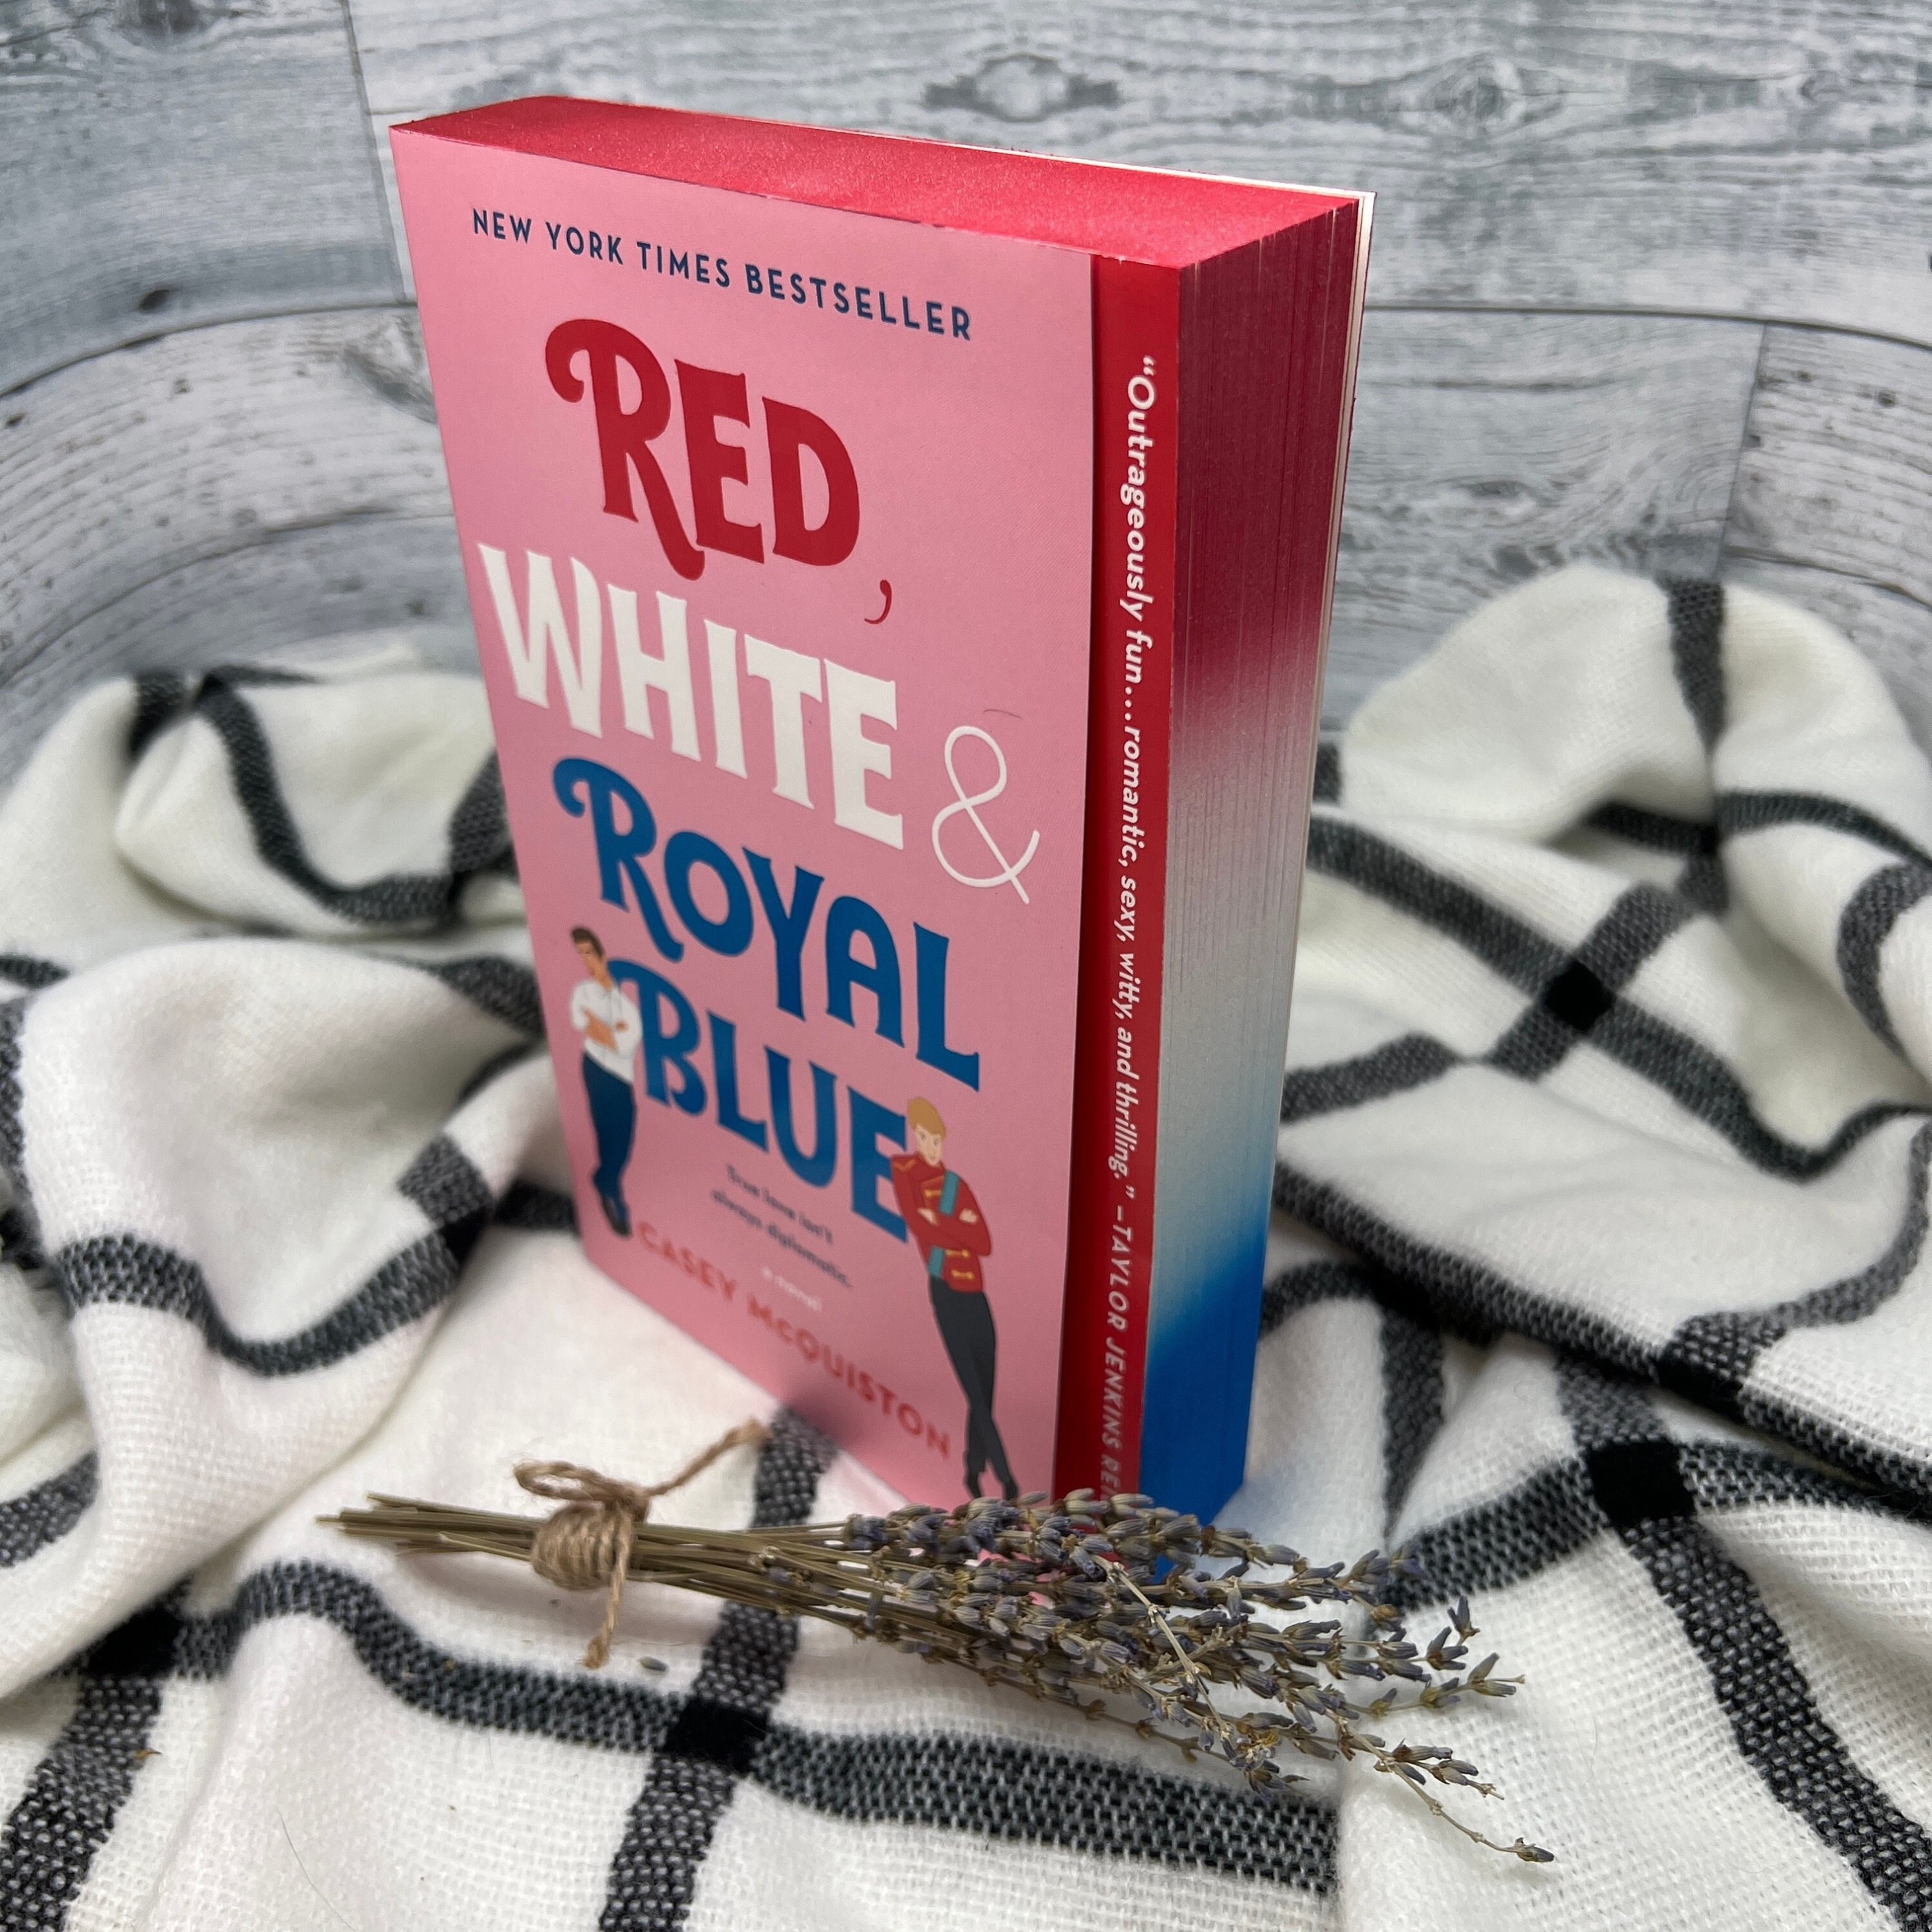 Red, White & Royal Blue - By Casey Mcquiston (paperback) : Target